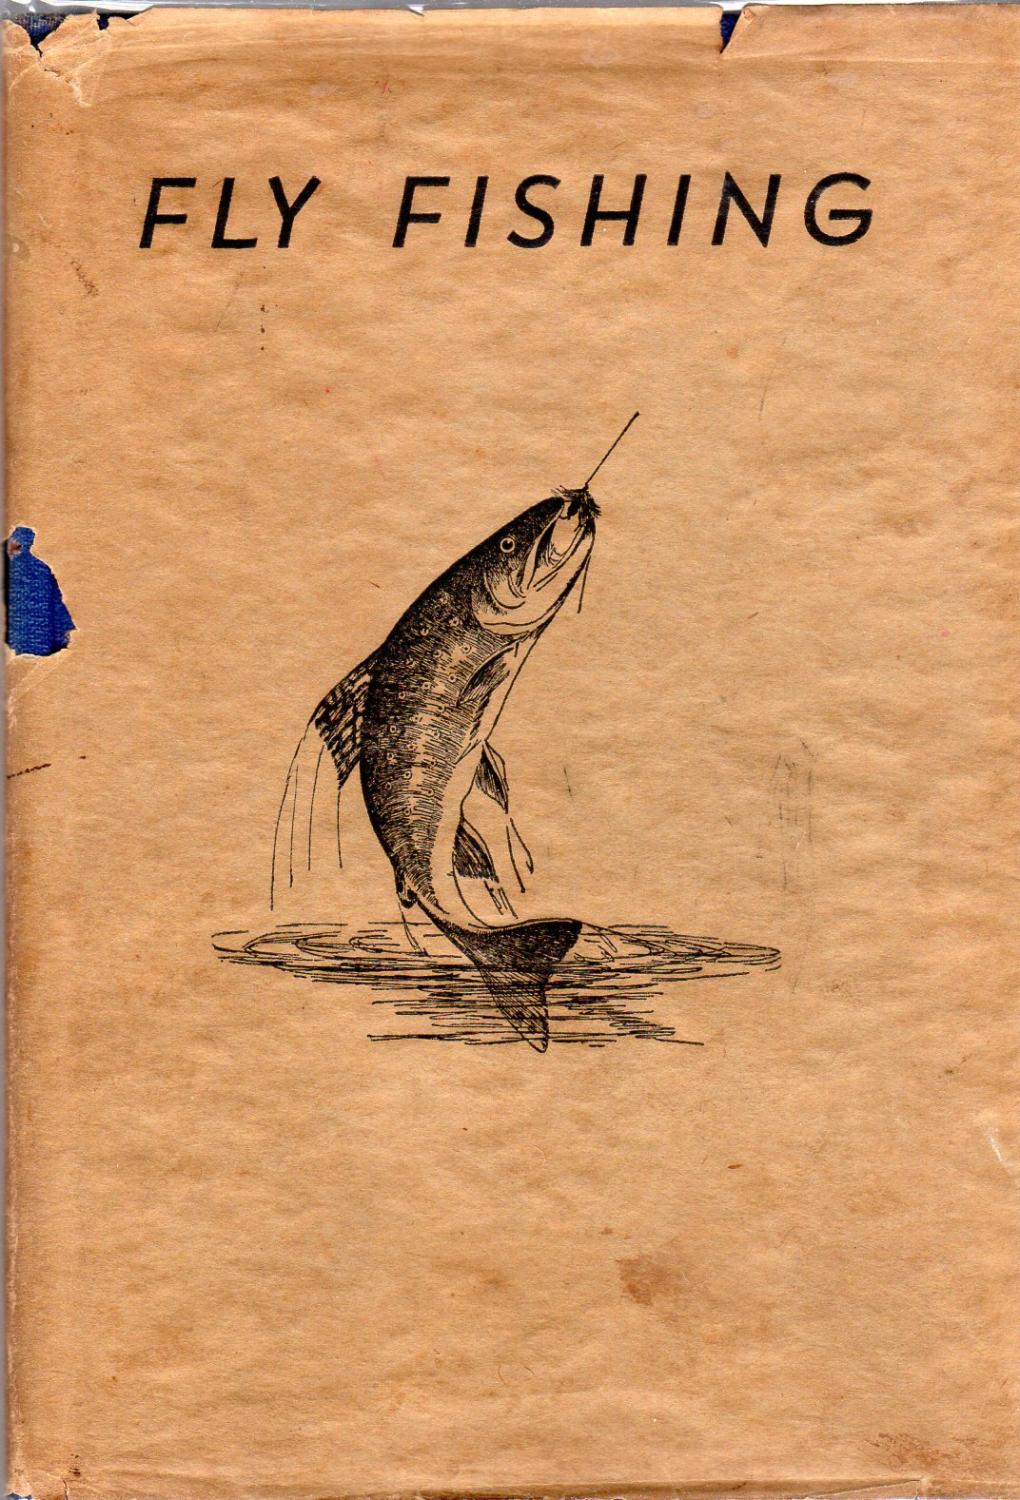 Fly Fishing: with Instructions on Fly Tying by Frances C. Wood (in